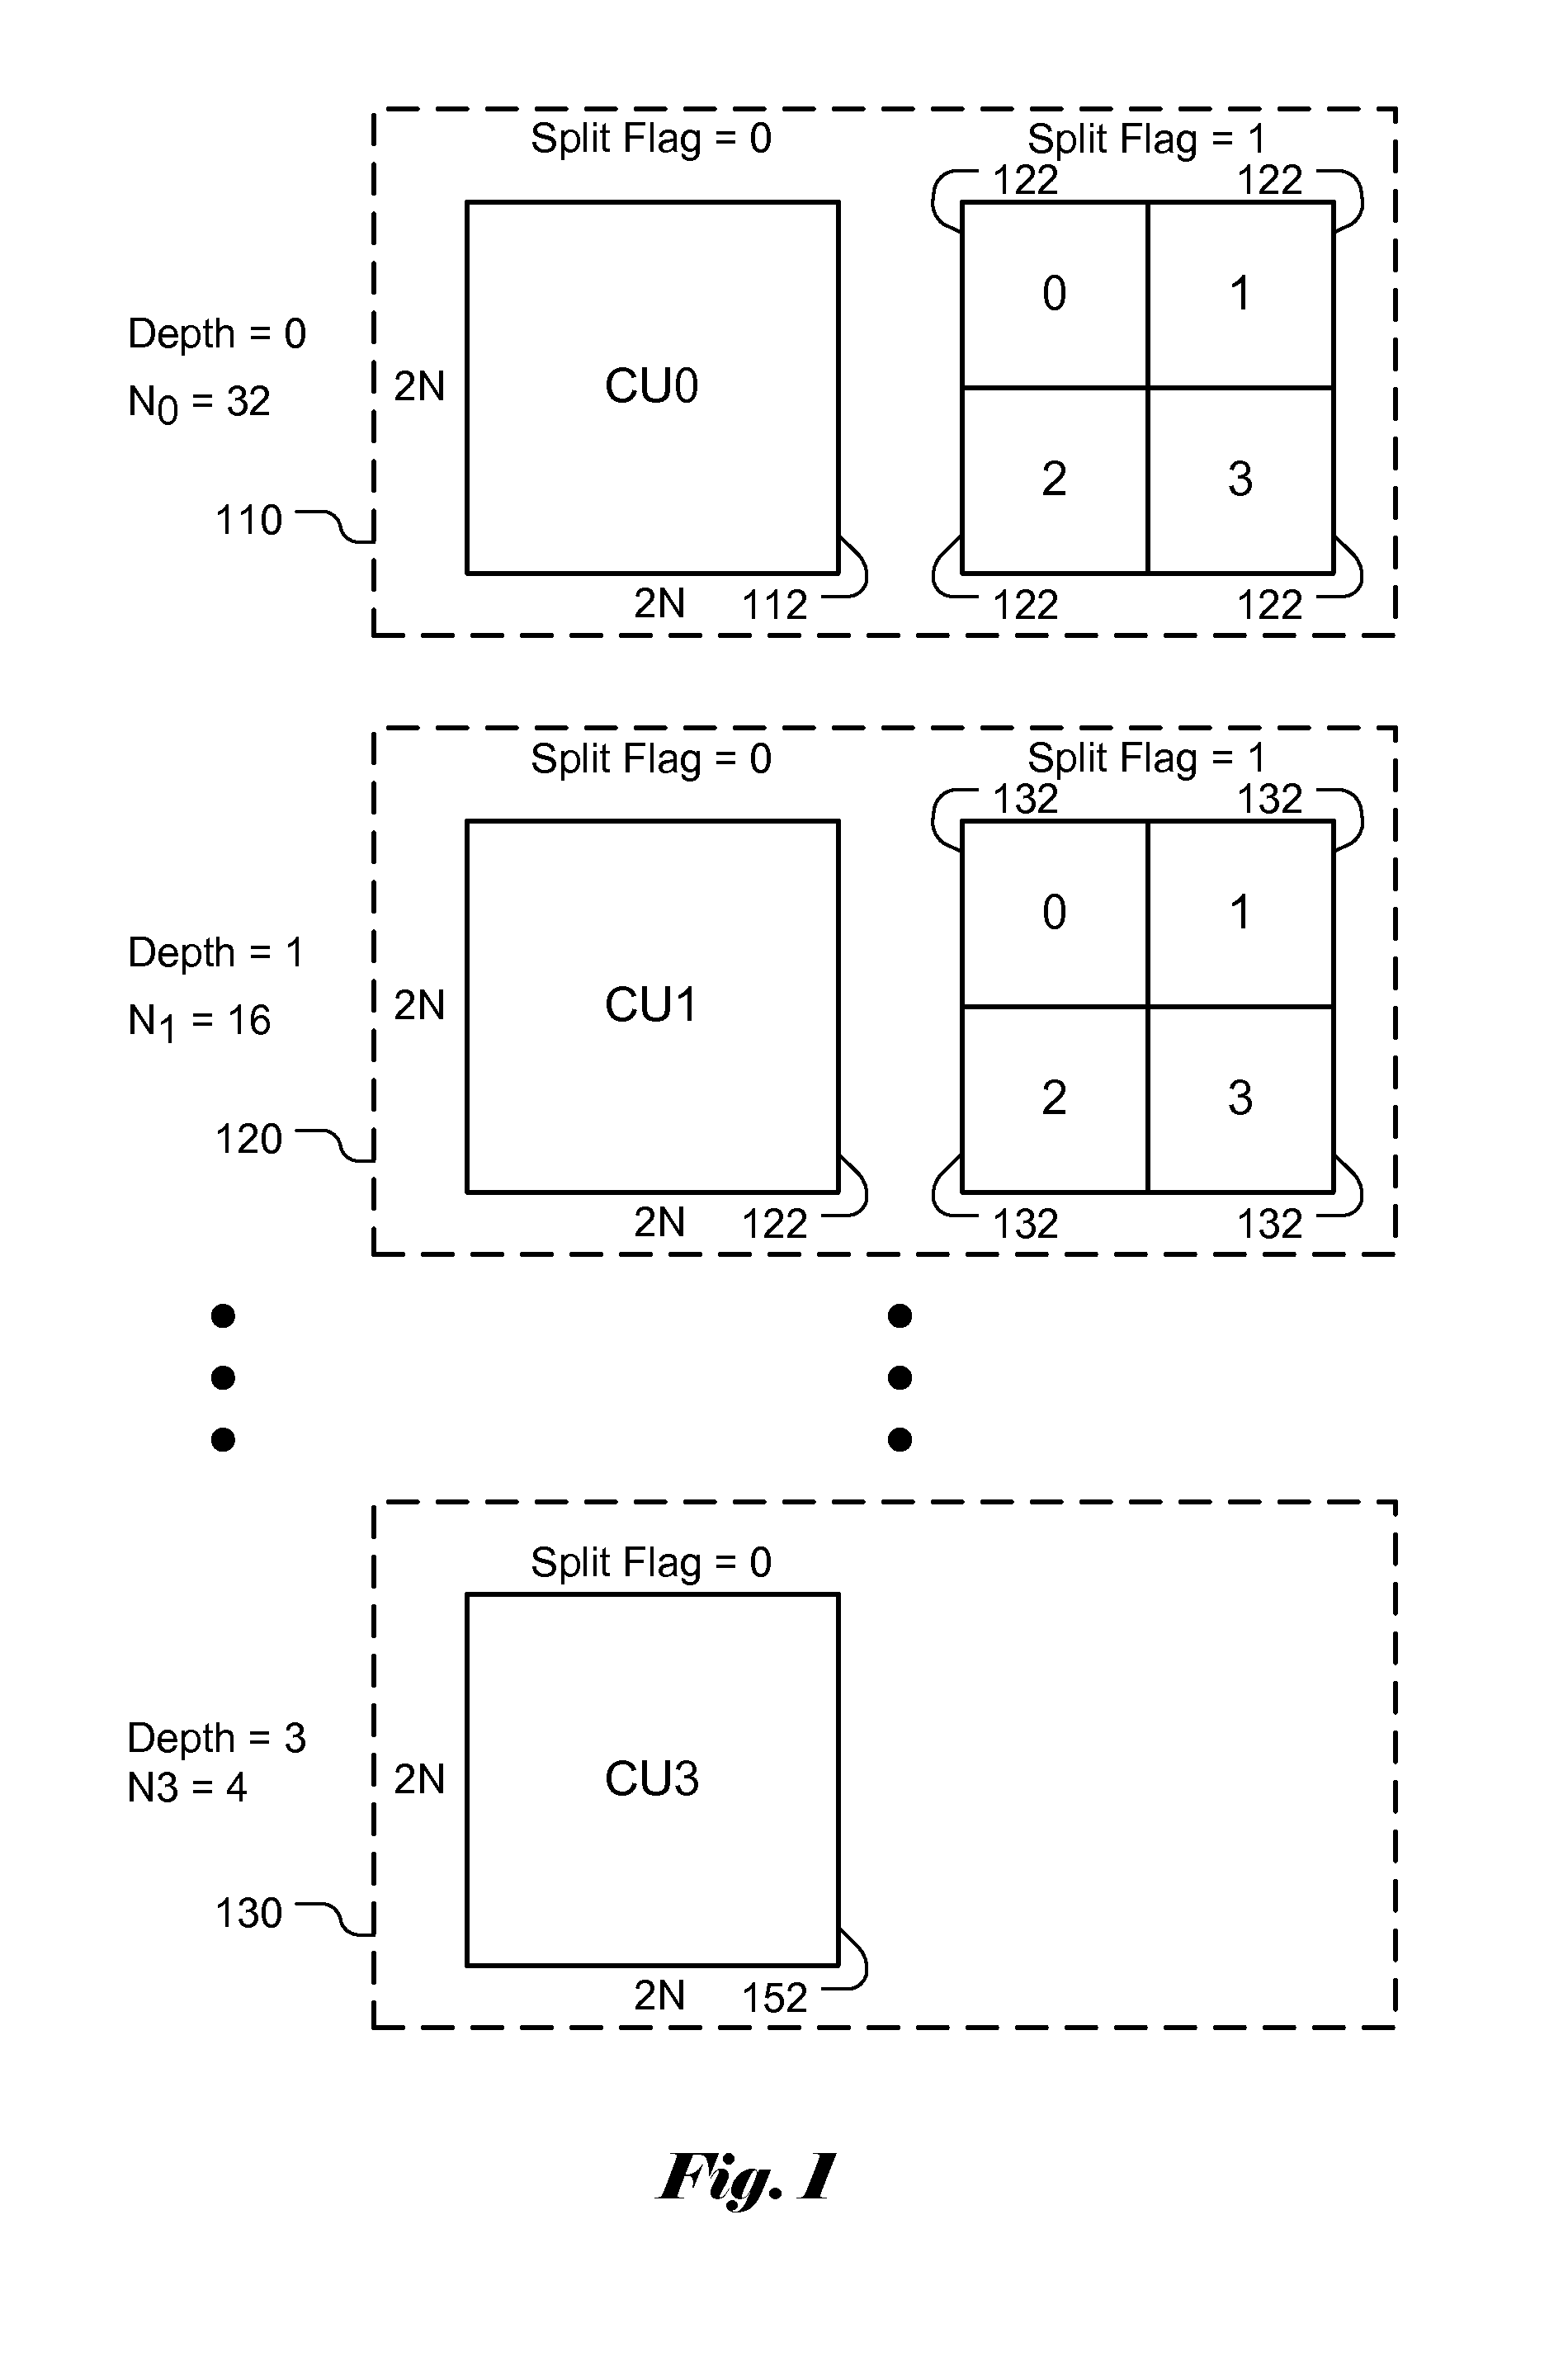 Apparatus and Method for High Efficiency Video Coding Using Flexible Slice Structure